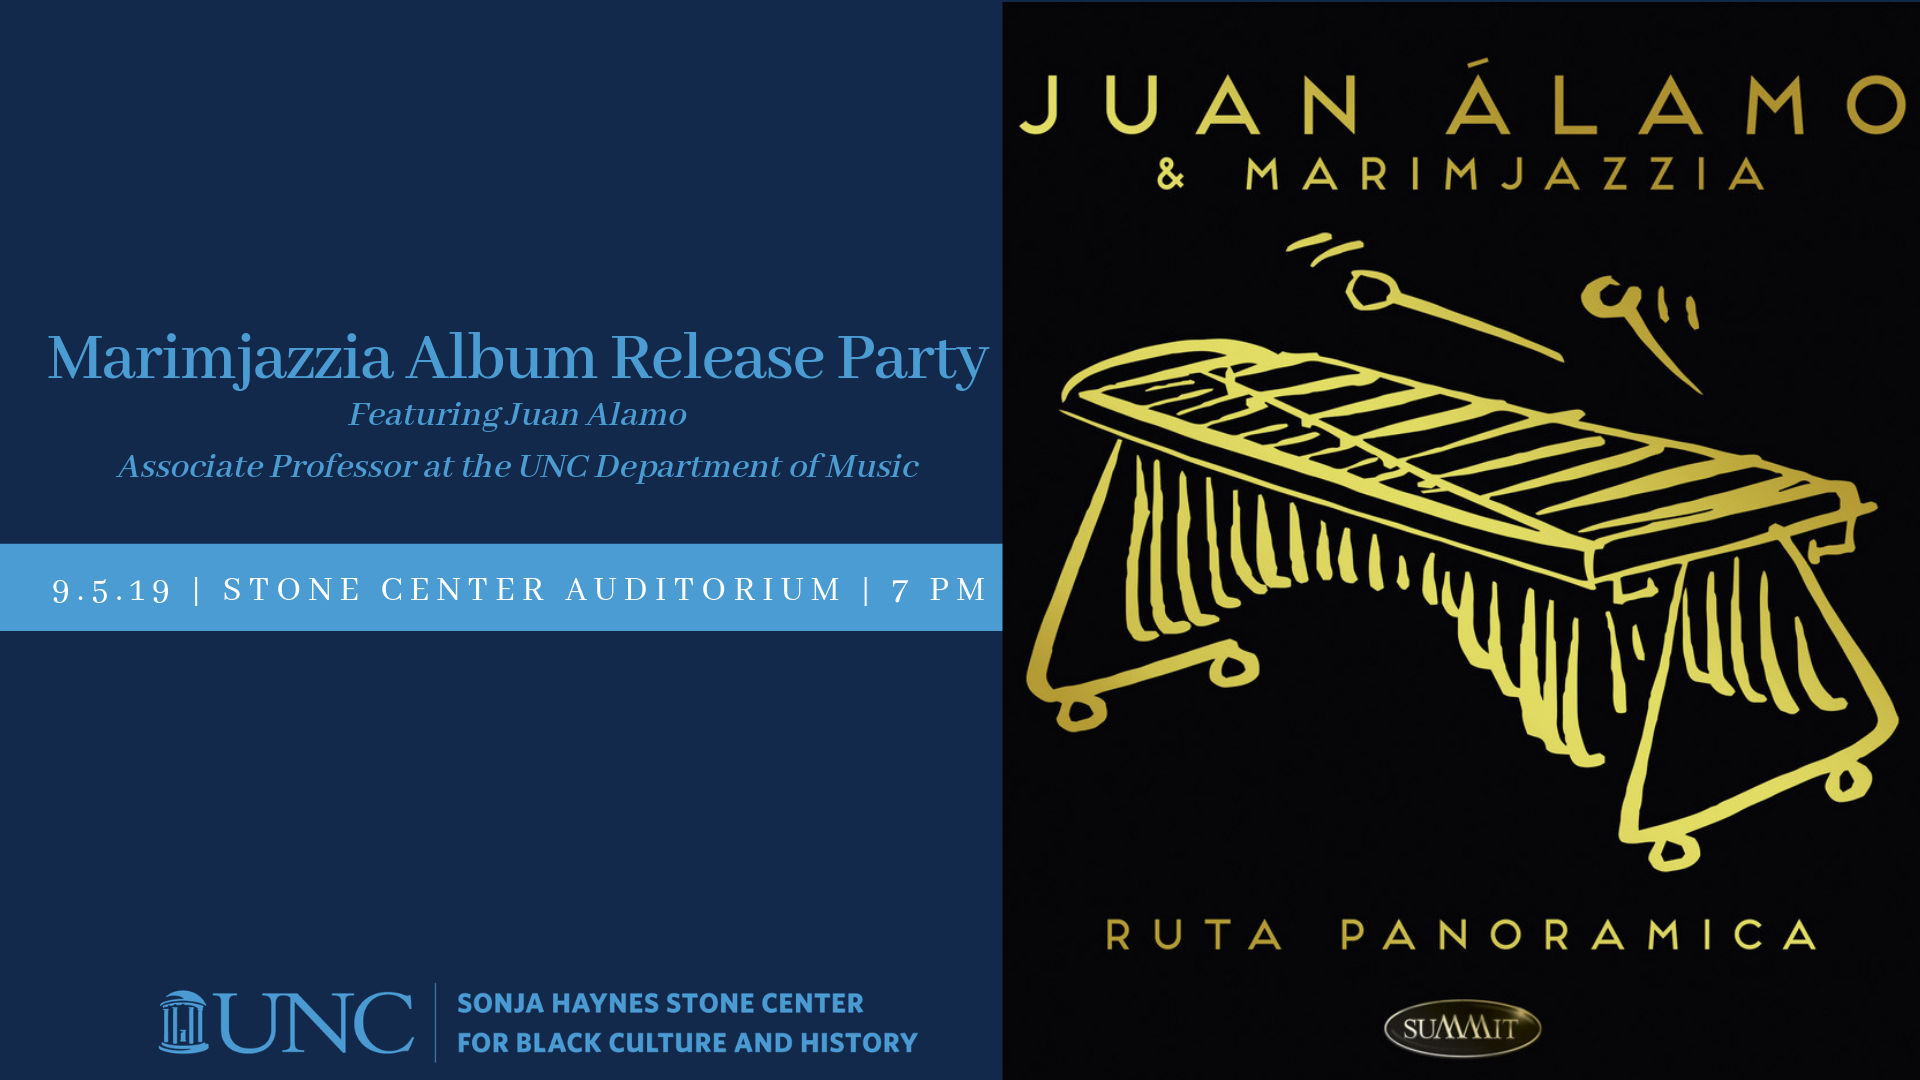 Poster Image, title is: "Marimjazzia Album Release Party"